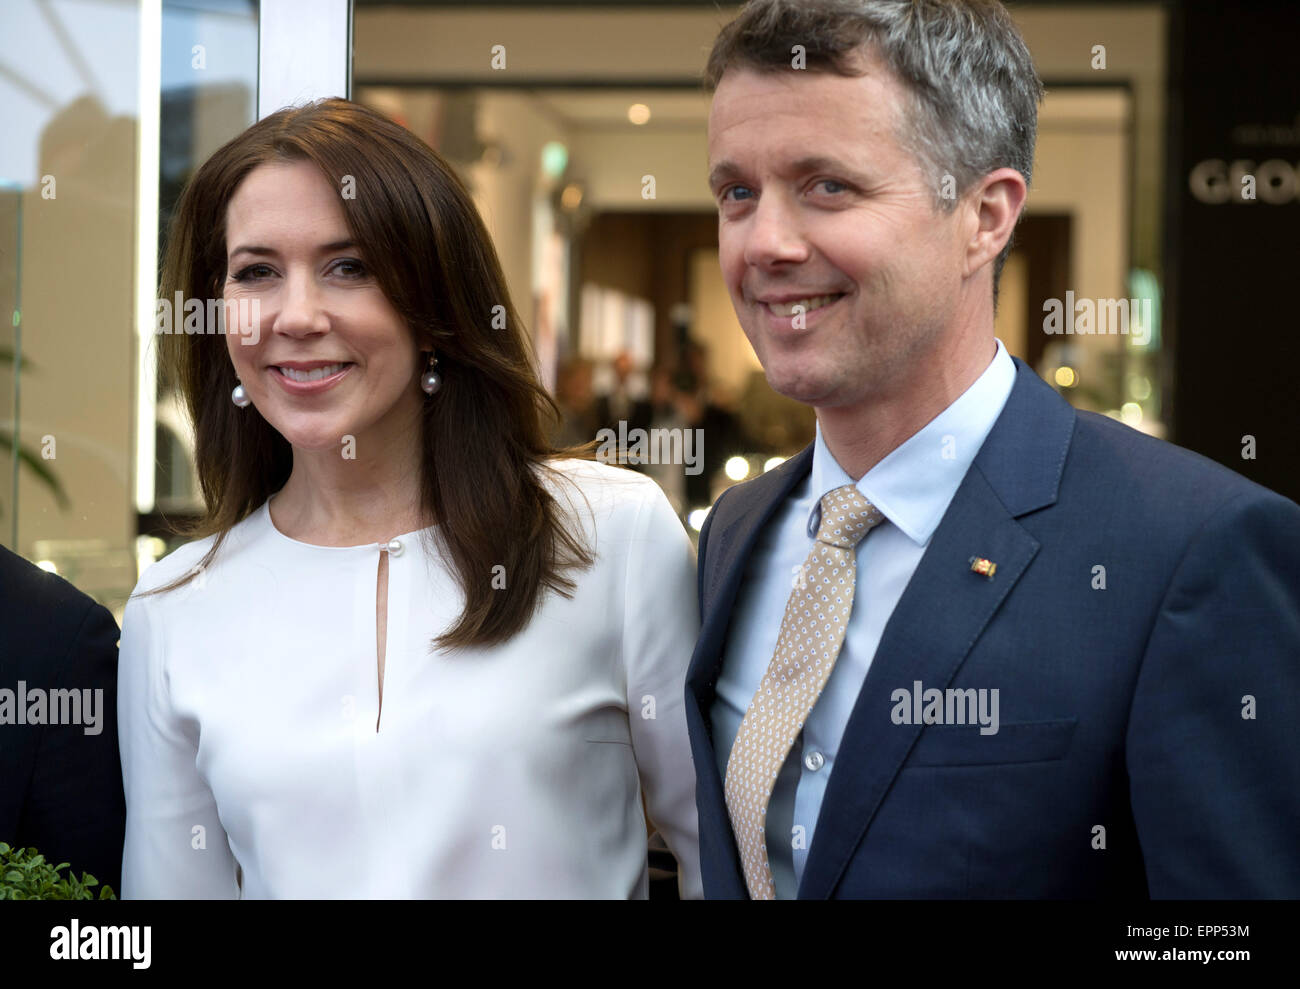 munich-germany-20th-may-2015-frederik-r-crown-prince-of-denmark-and-EPP53M.jpg